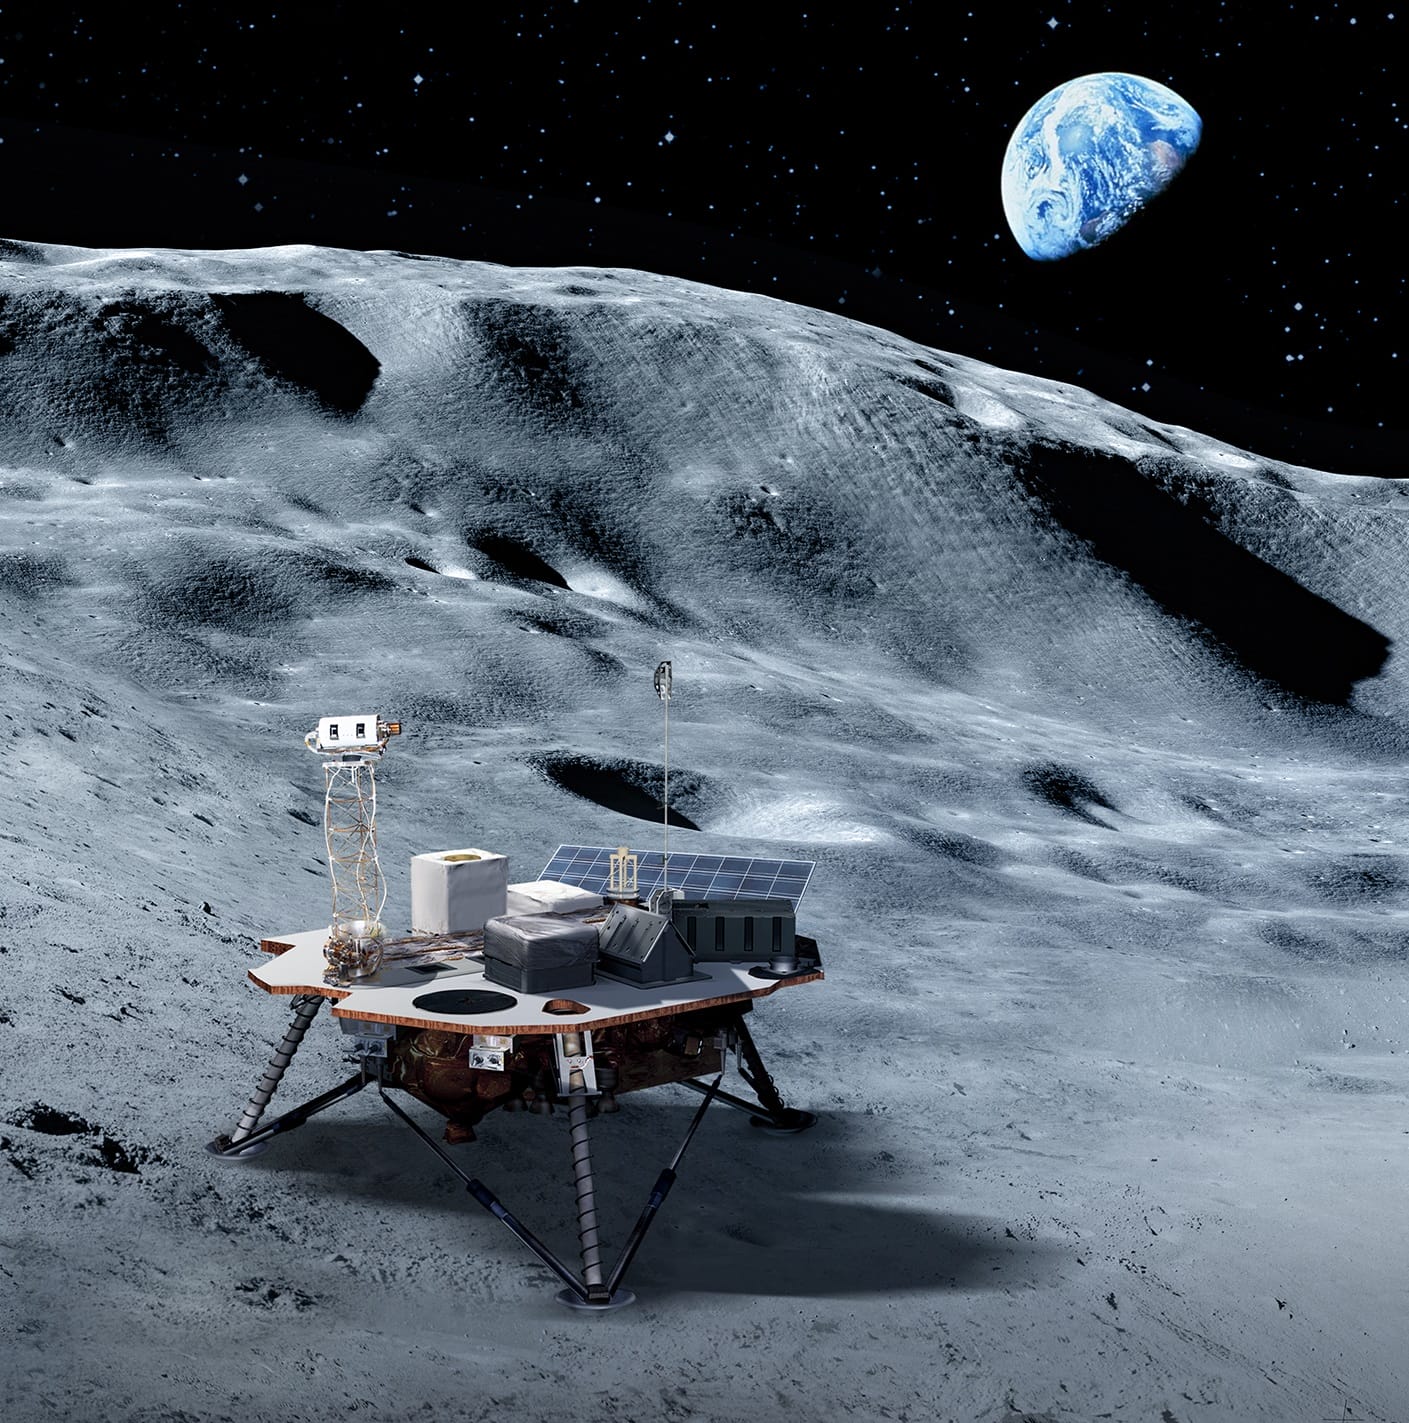 Artist's impression of the CLPS mission on the Moon.